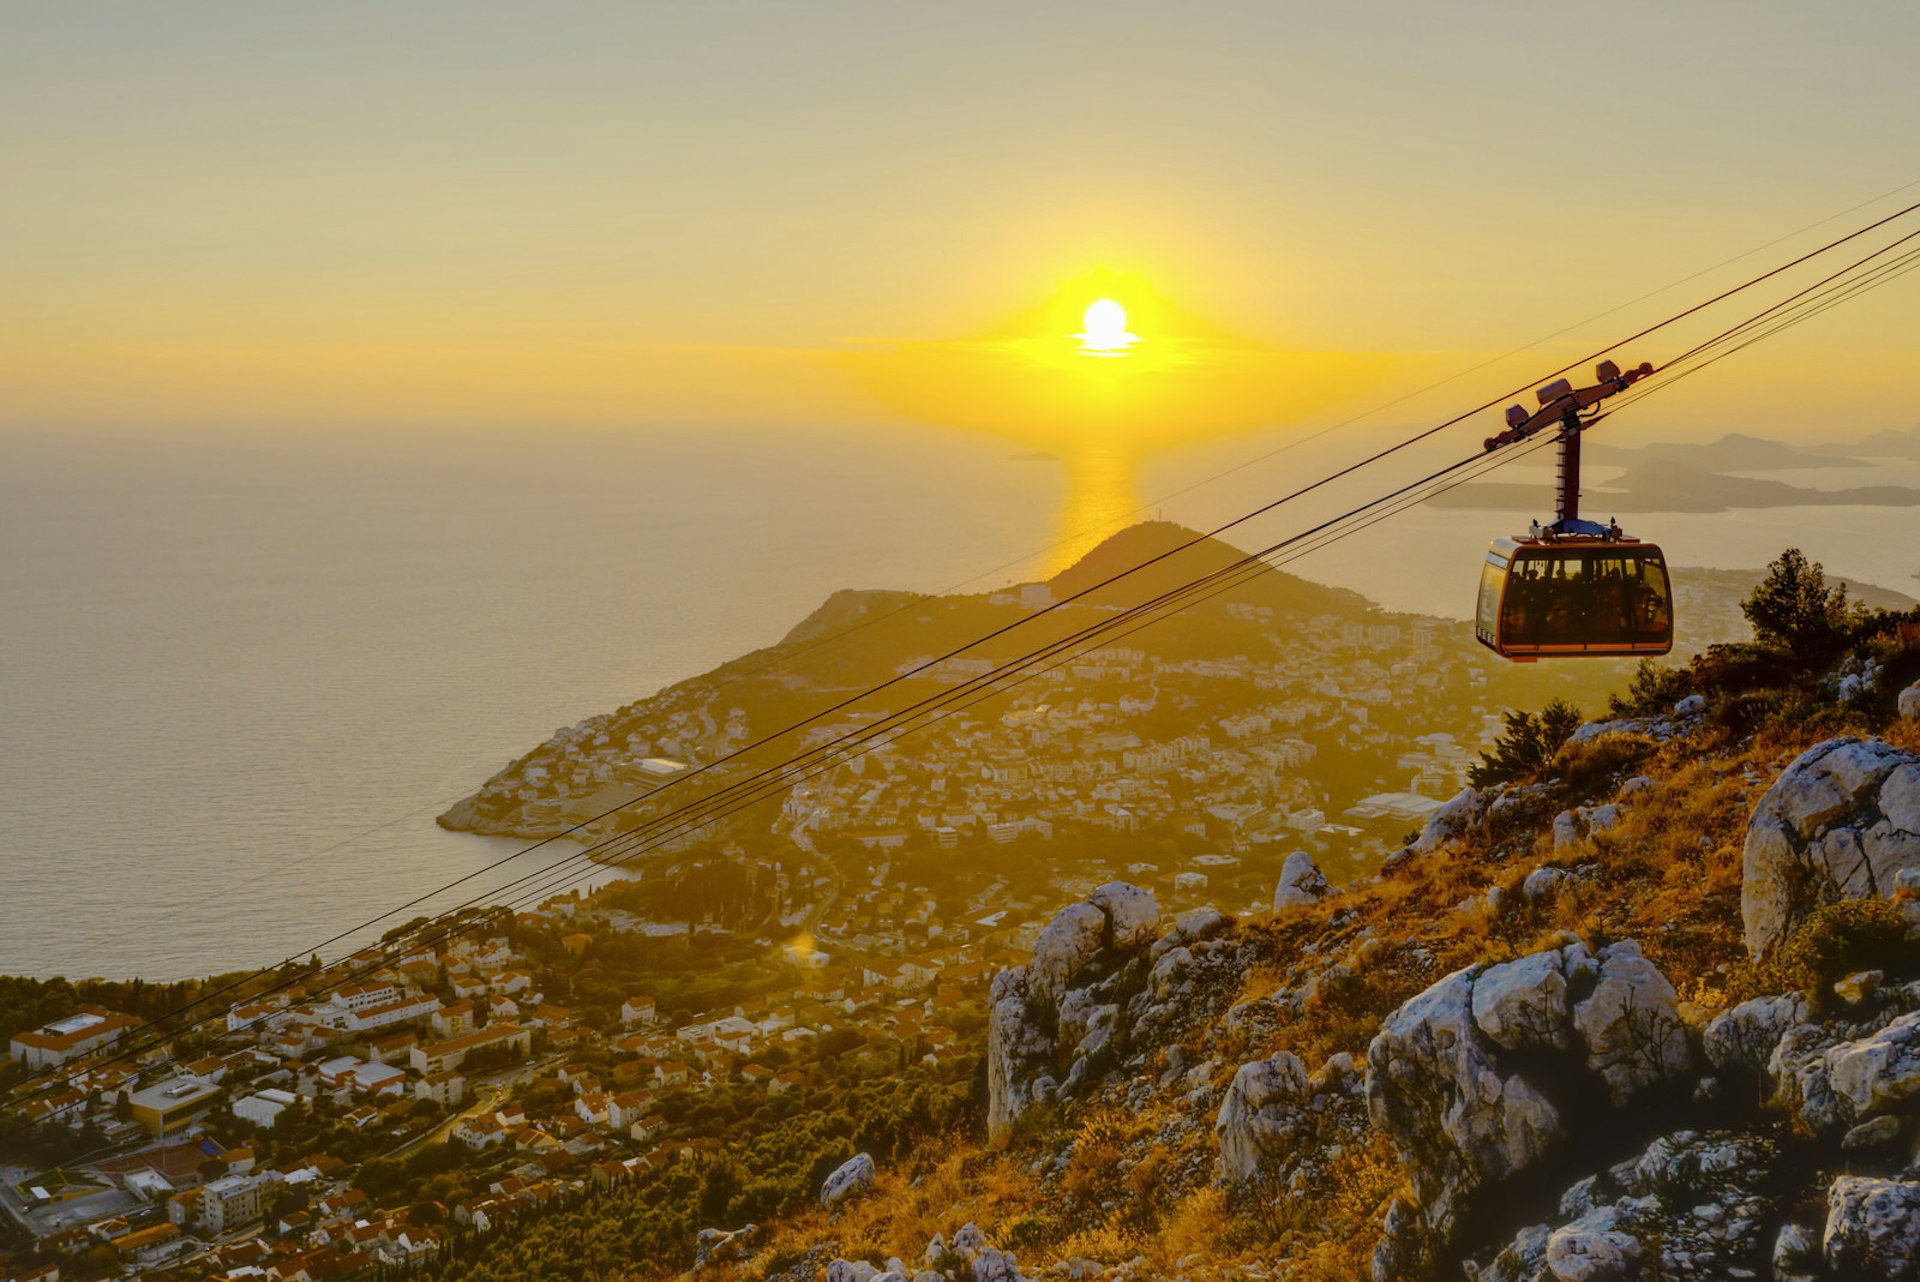 Take the cable car up Mt Srđ for stunning views of the city 